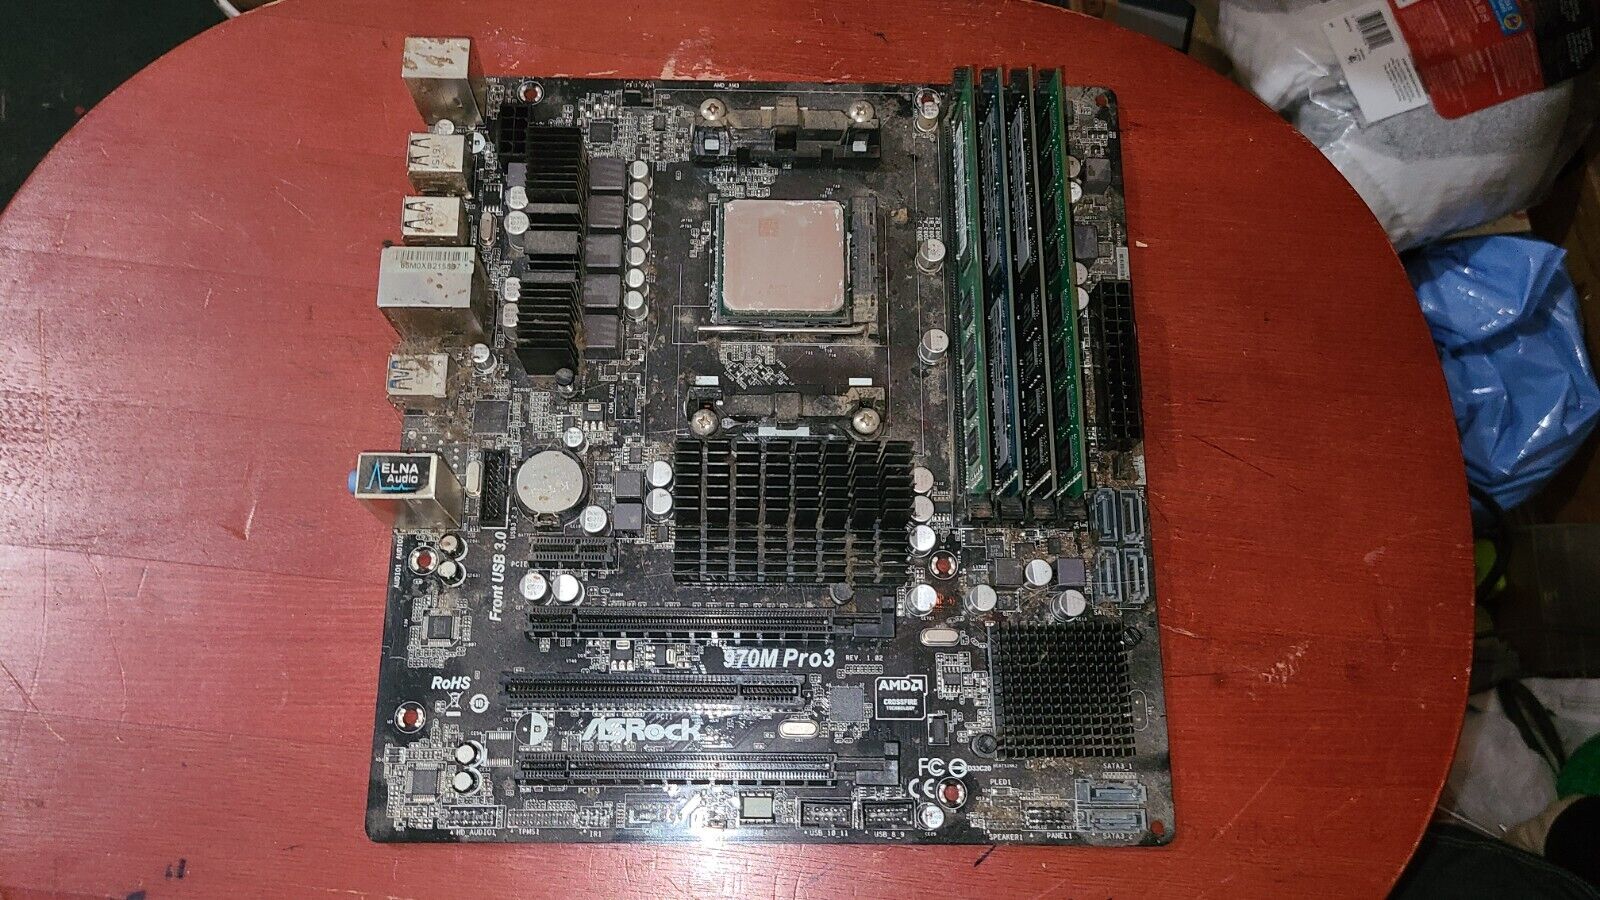 ASRock 970M Pro3 DDR3 SDRAM, AMD  Motherboard with Ram and CPU